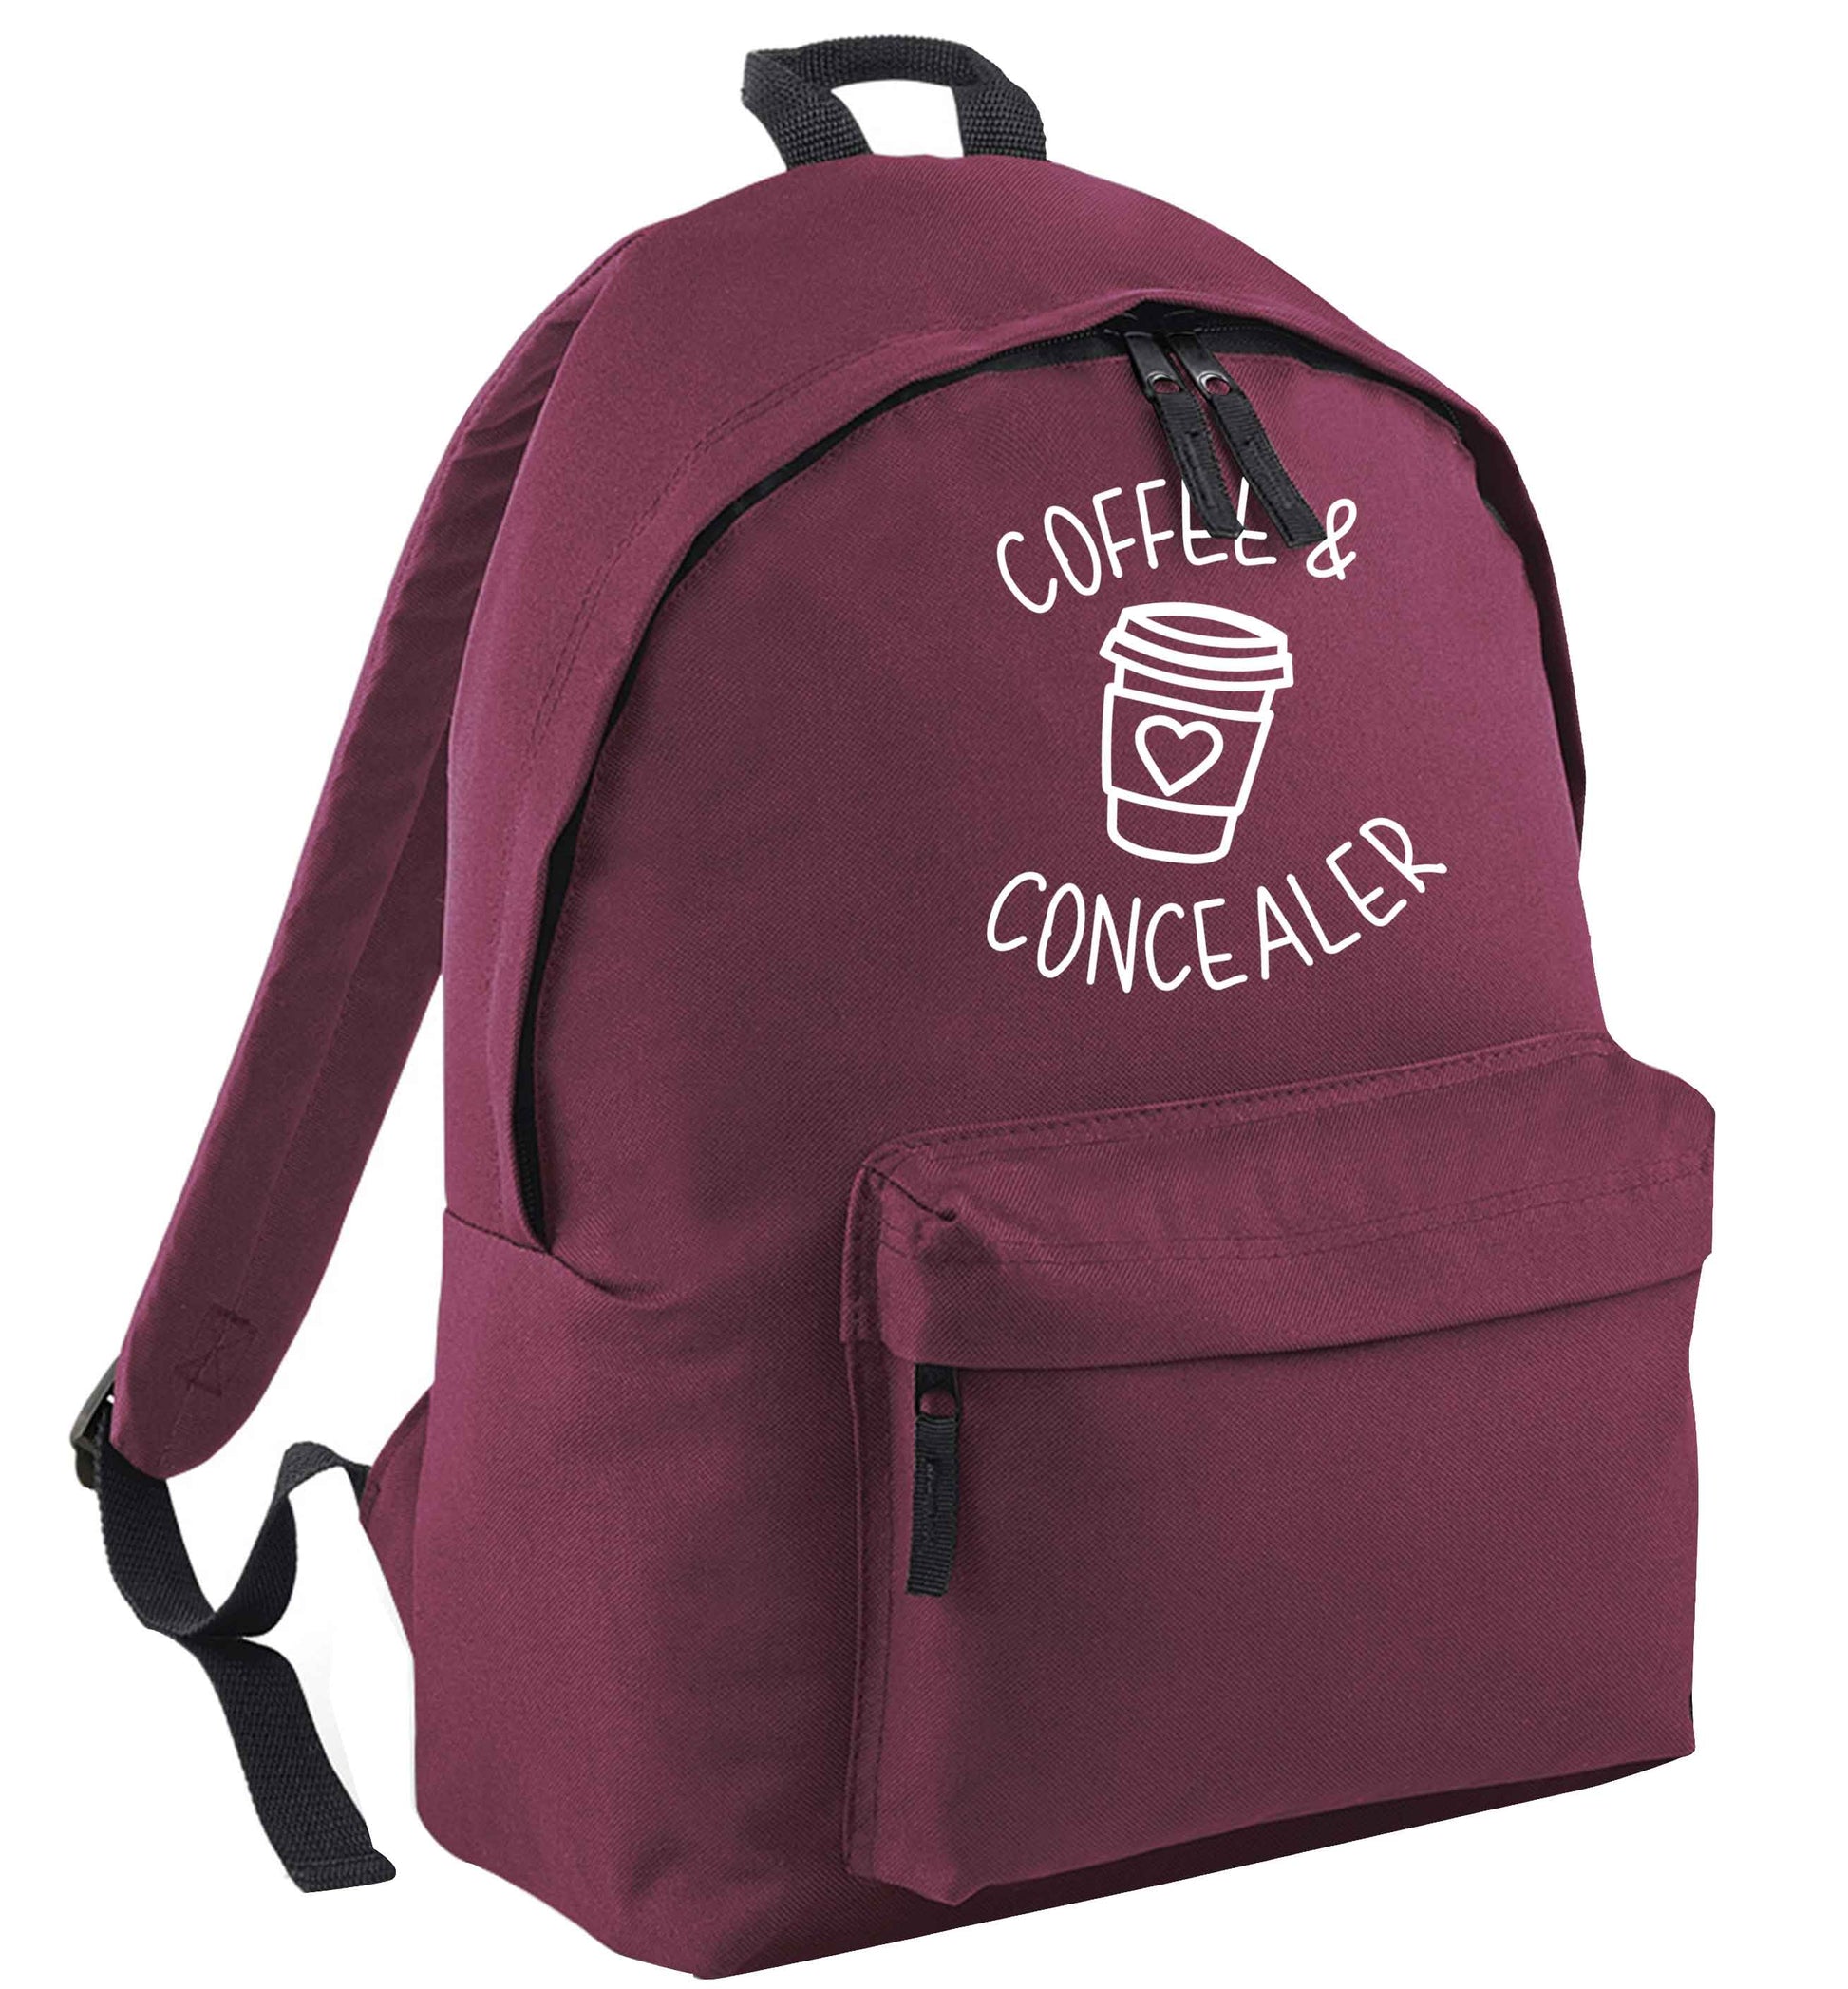 Coffee and concealer maroon adults backpack